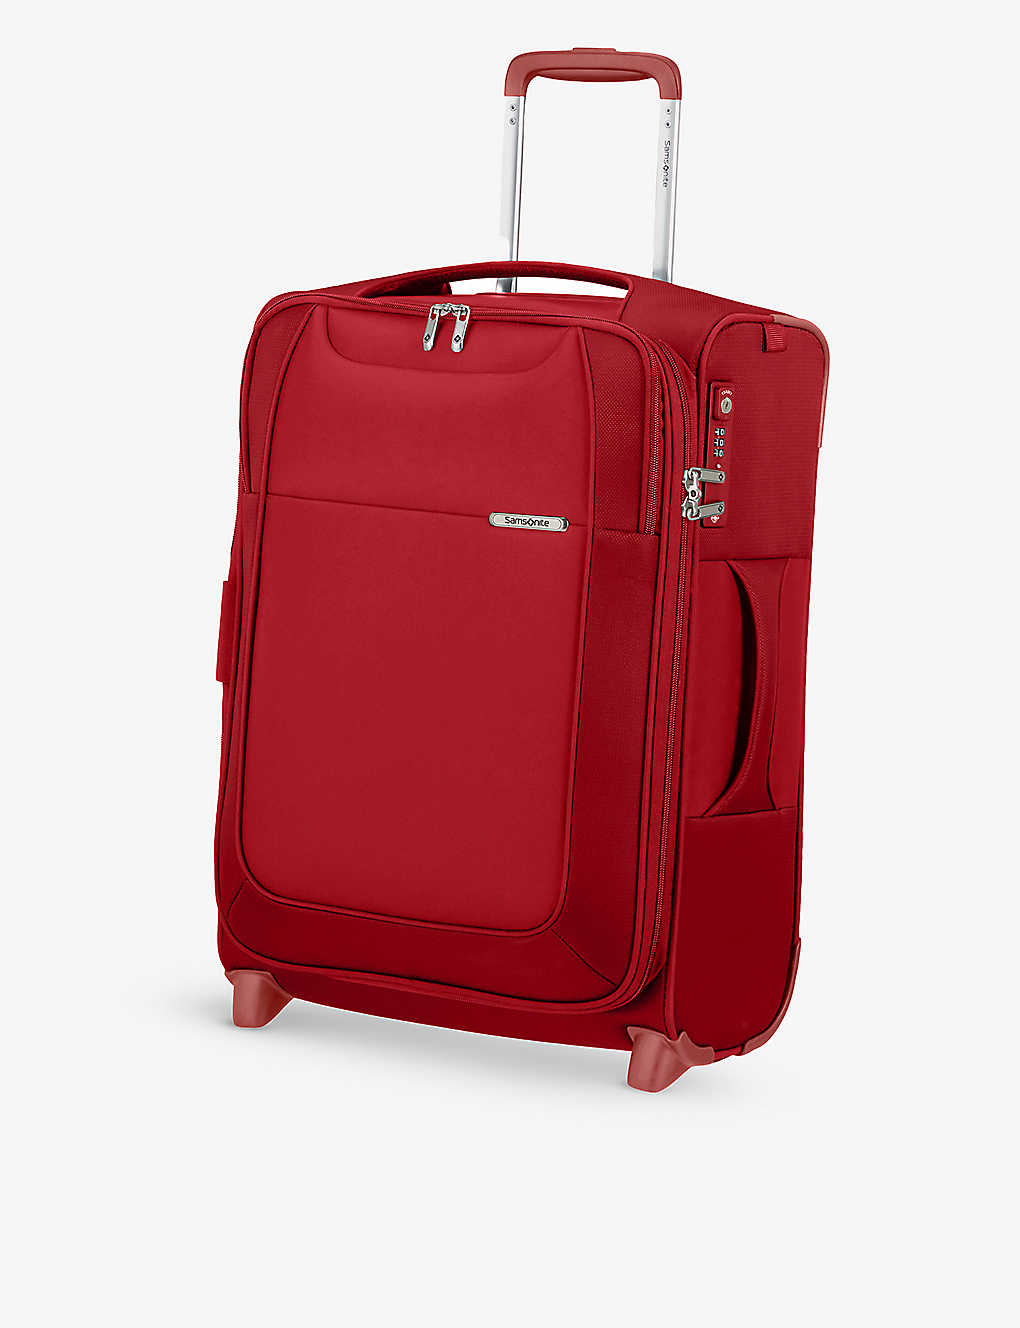 Samsonite Spinner Branded Woven Suitcase In Chili Red